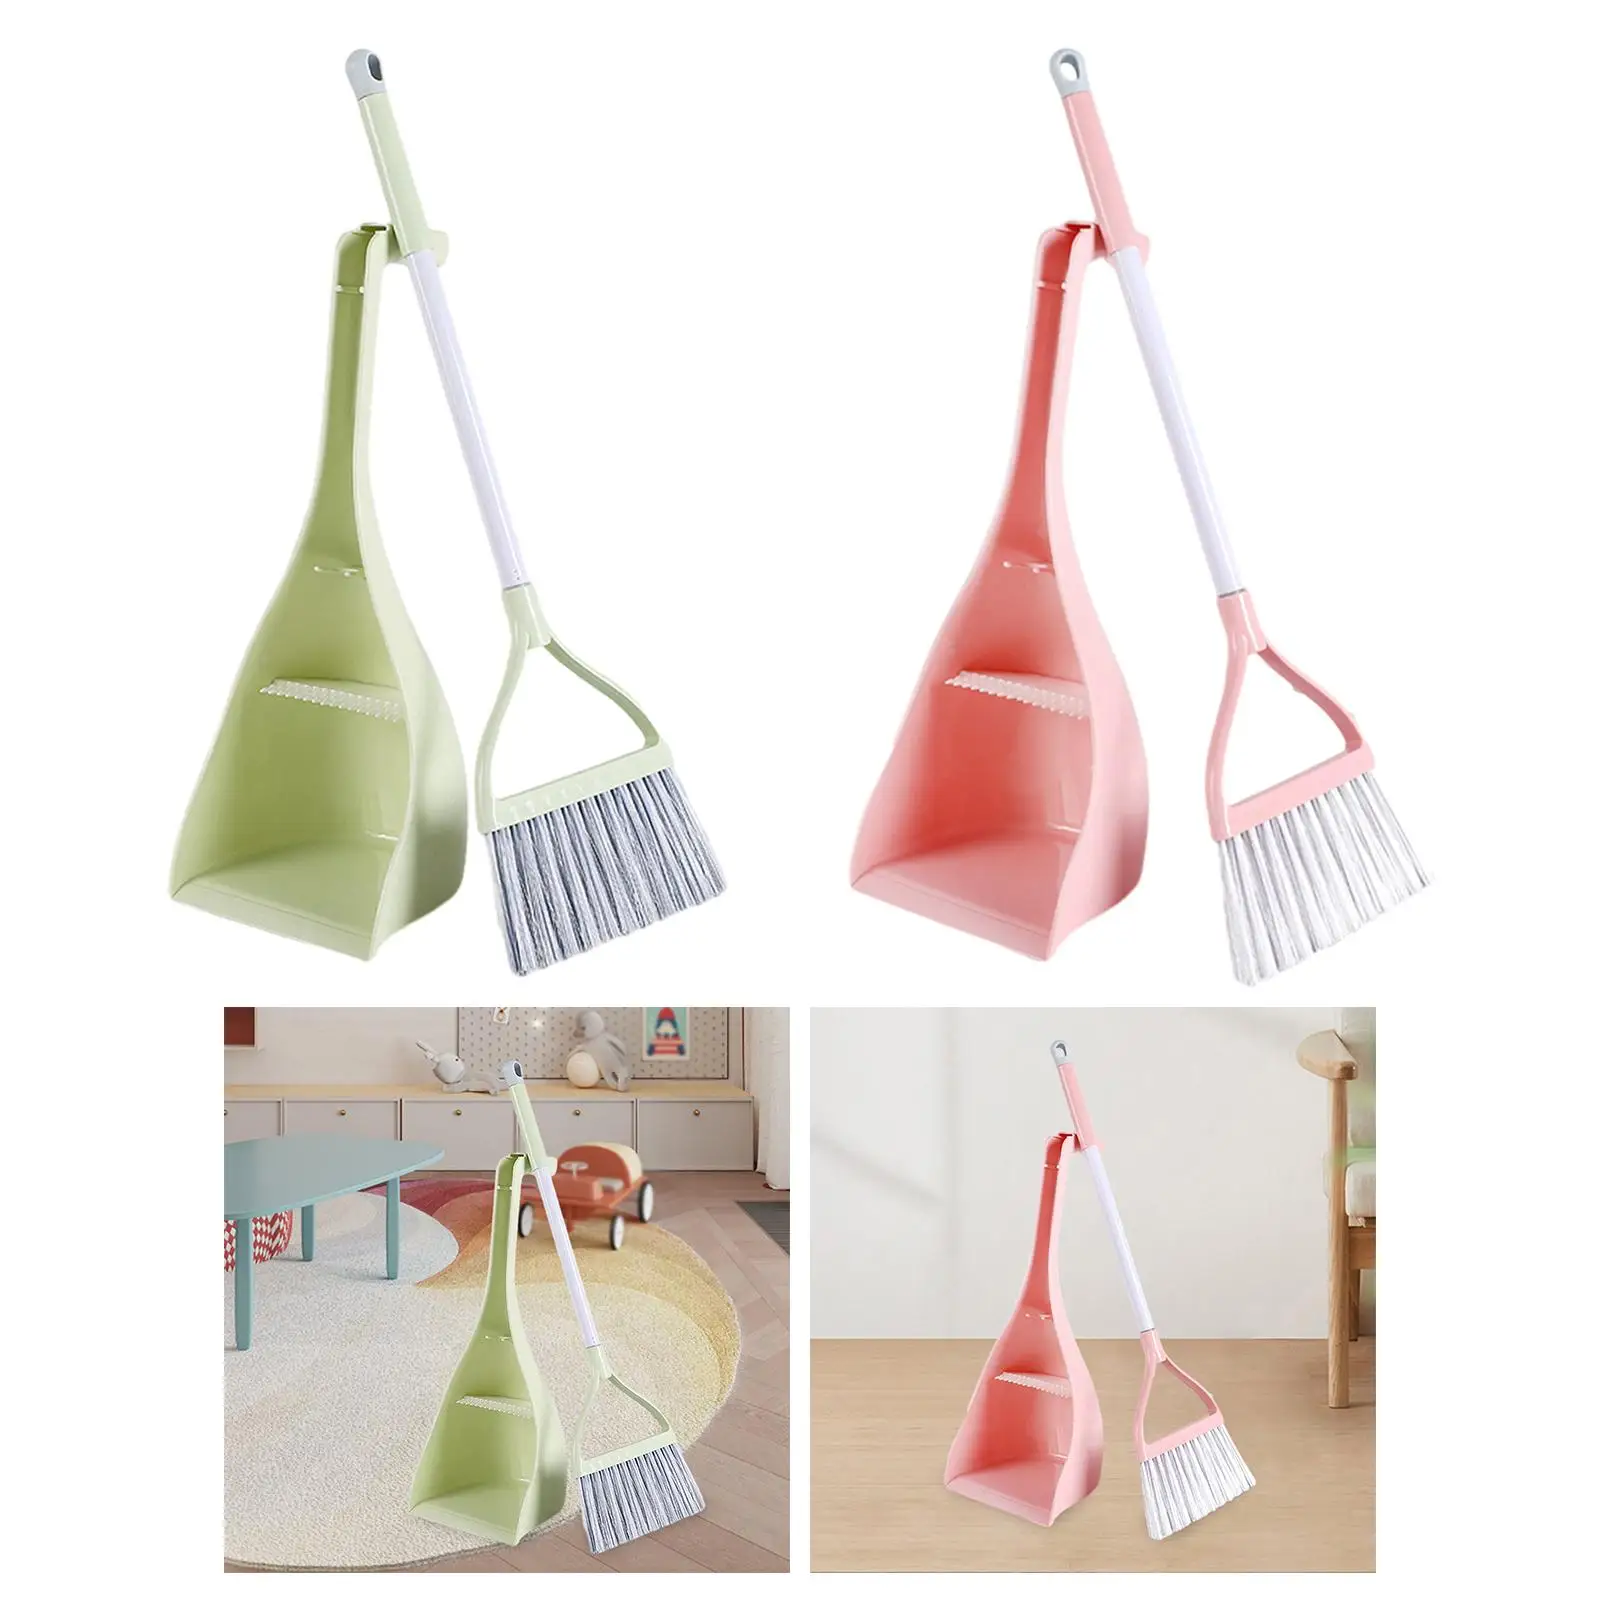 Mini Broom with Dustpan Play House Toy PP and Stainless Steel Material Pretend Housekeeping Play Set for Kindergarten Ages 3-6